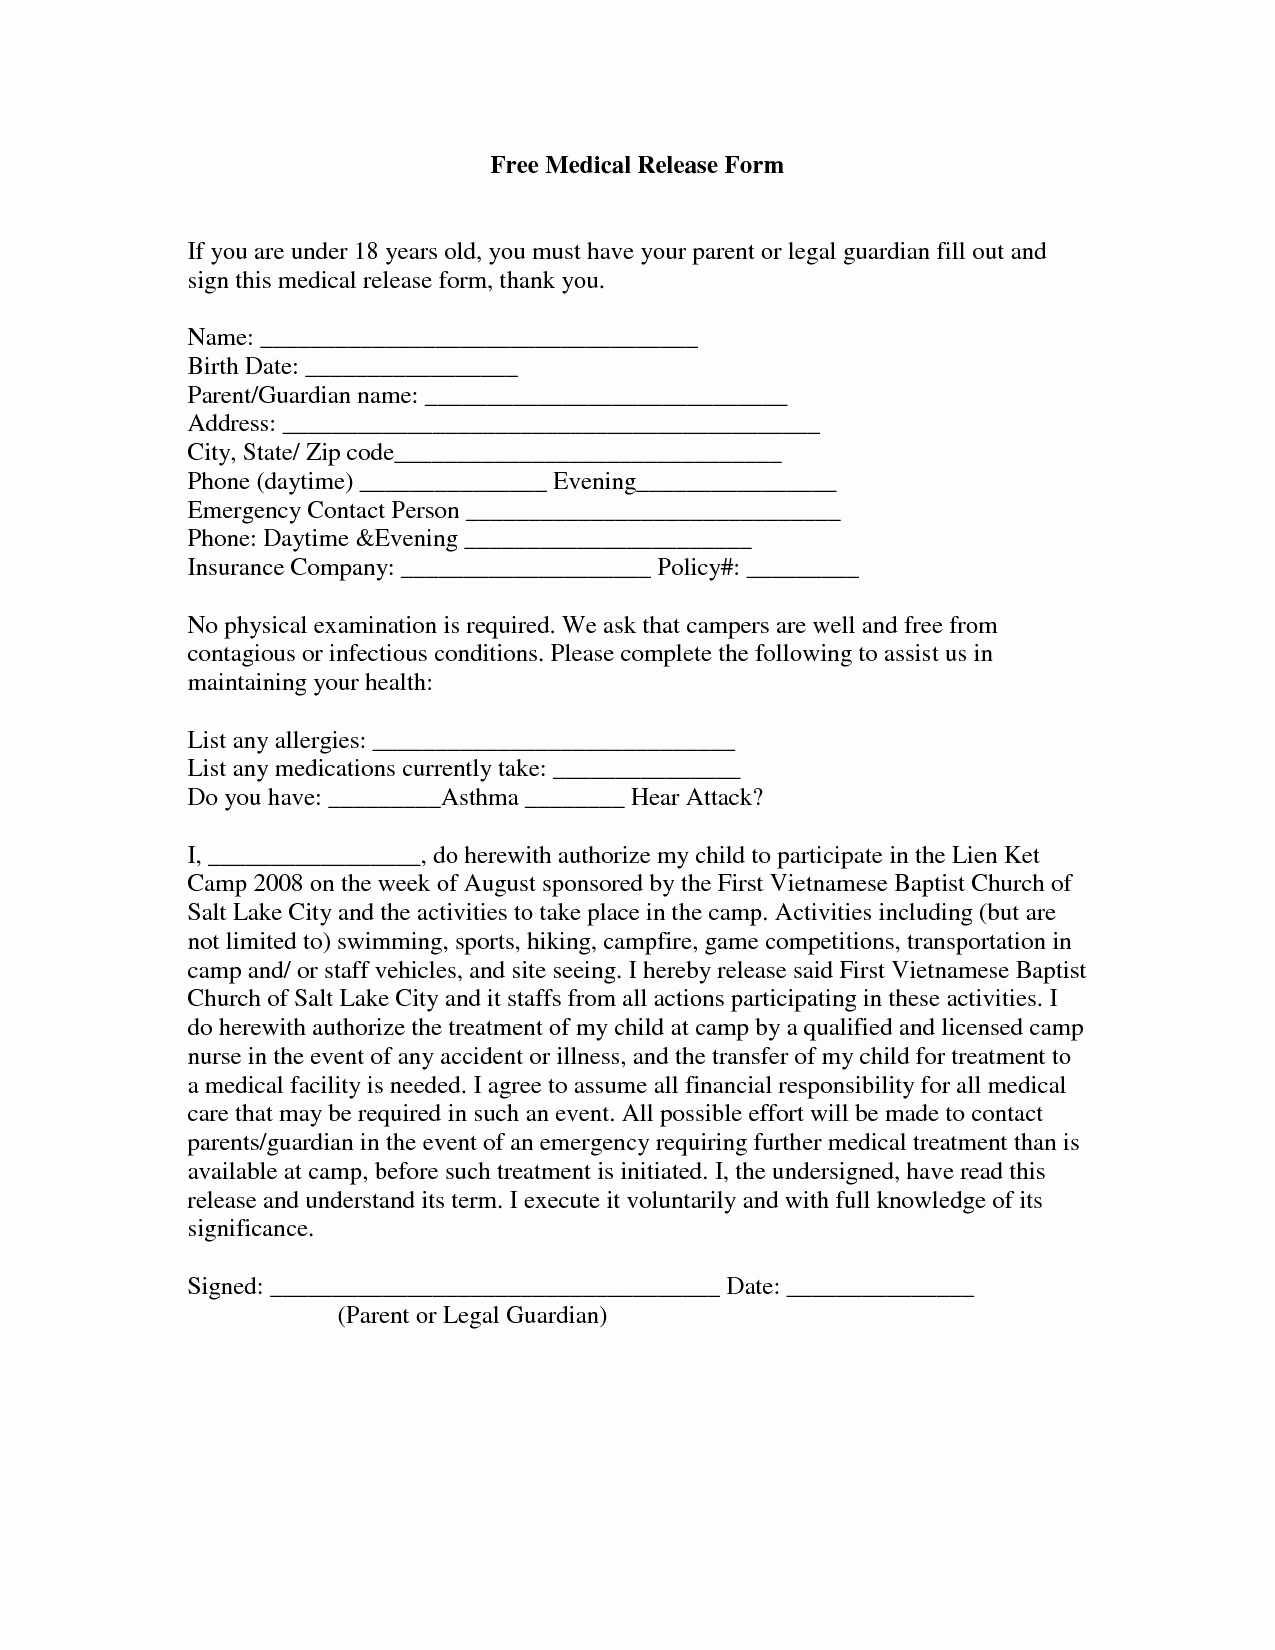 Free Medical Release form Elegant Template Printable Gallery Category Page 20